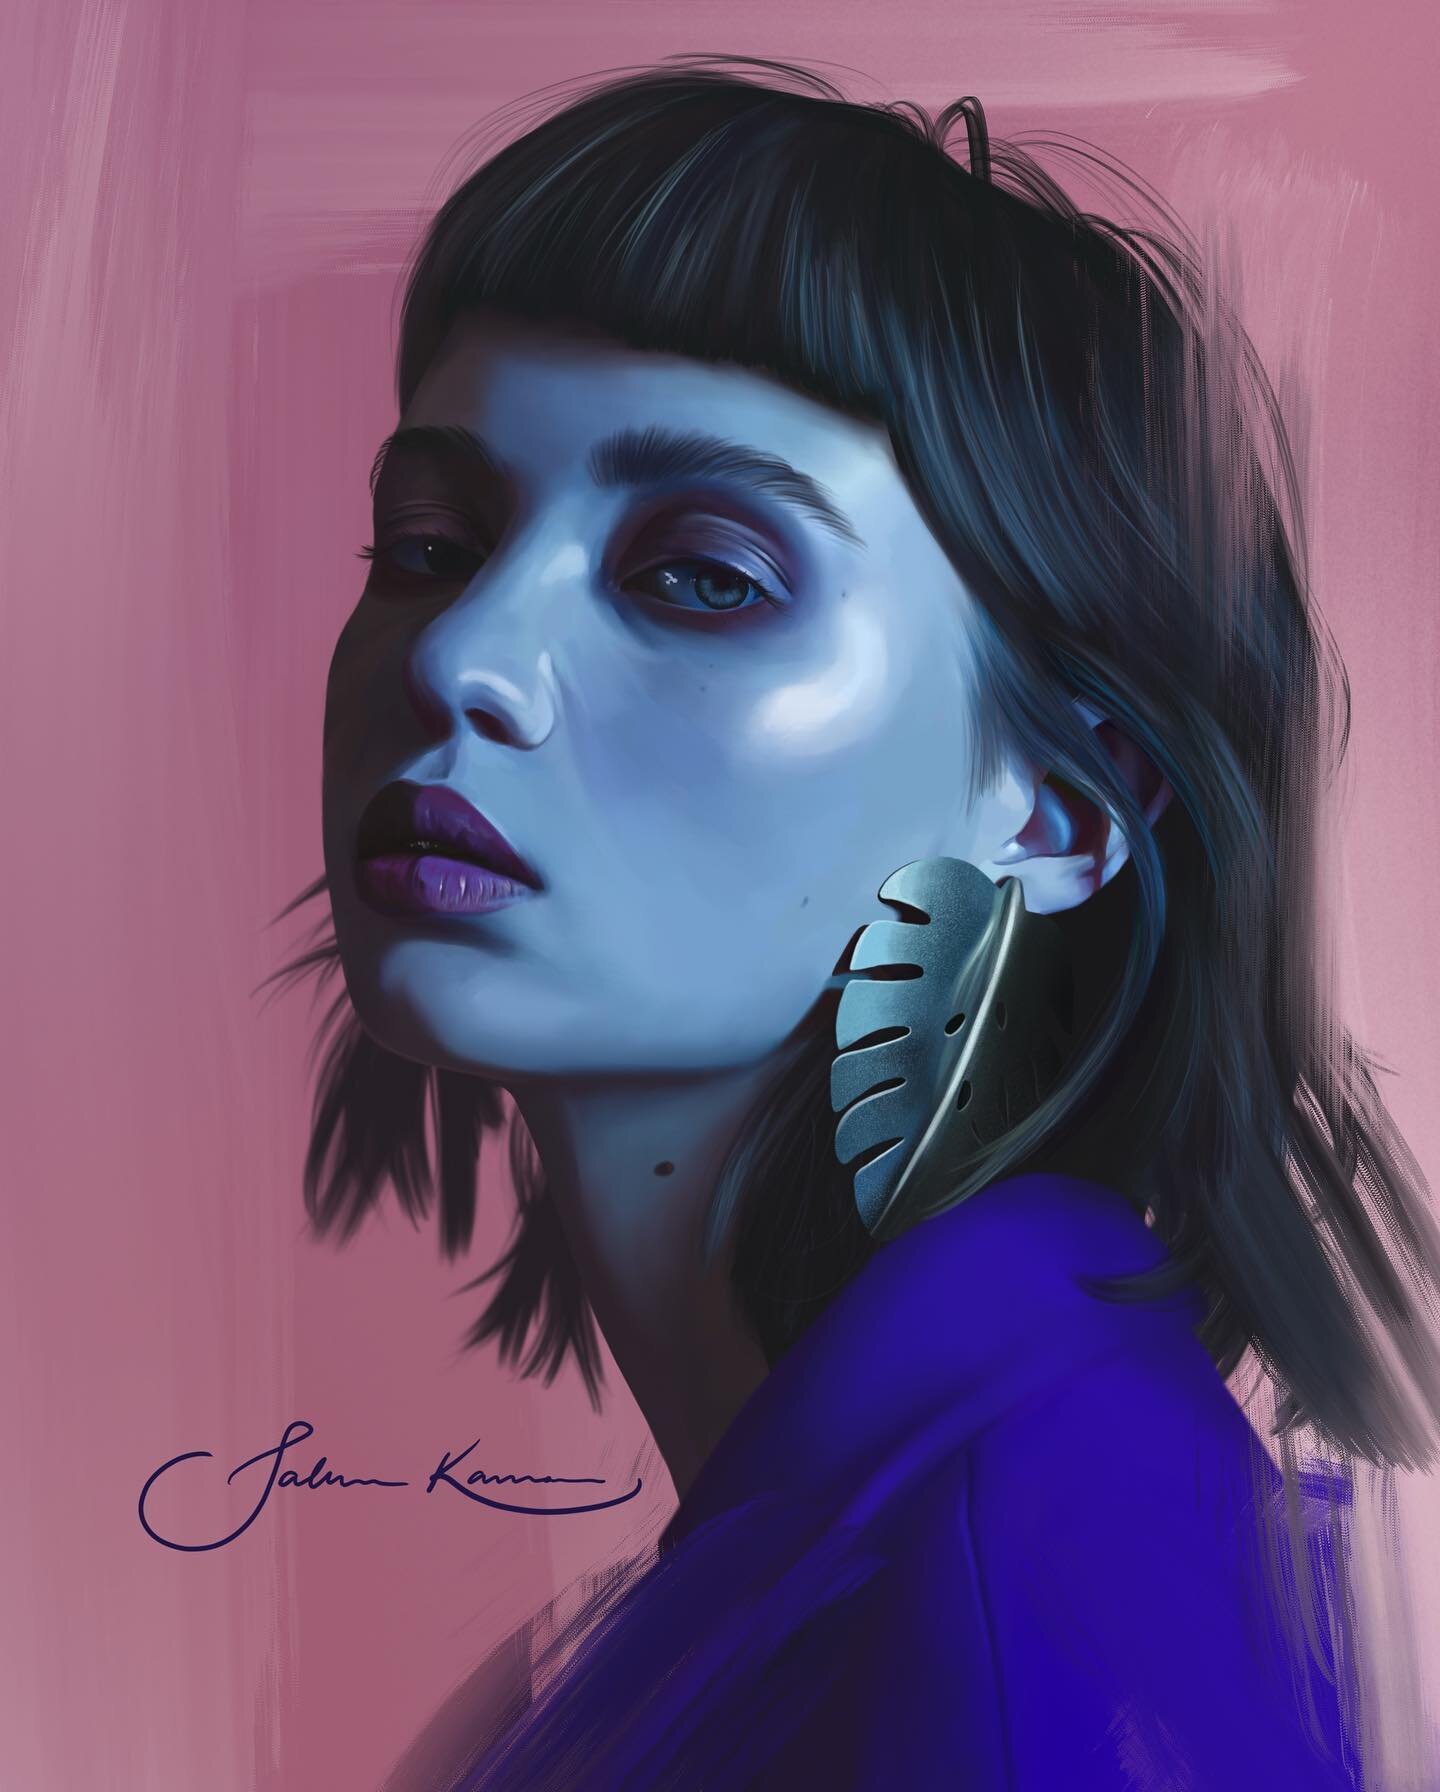 I&rsquo;m coming back to instagram with this digital painting that I made a while ago that I haven&rsquo;t posted yet! I hope to start posting more regularly, and I hope you like it! 💜💙
Swipe for the process!
&bull;
&bull;
&bull;
&bull;
&bull;
&bul